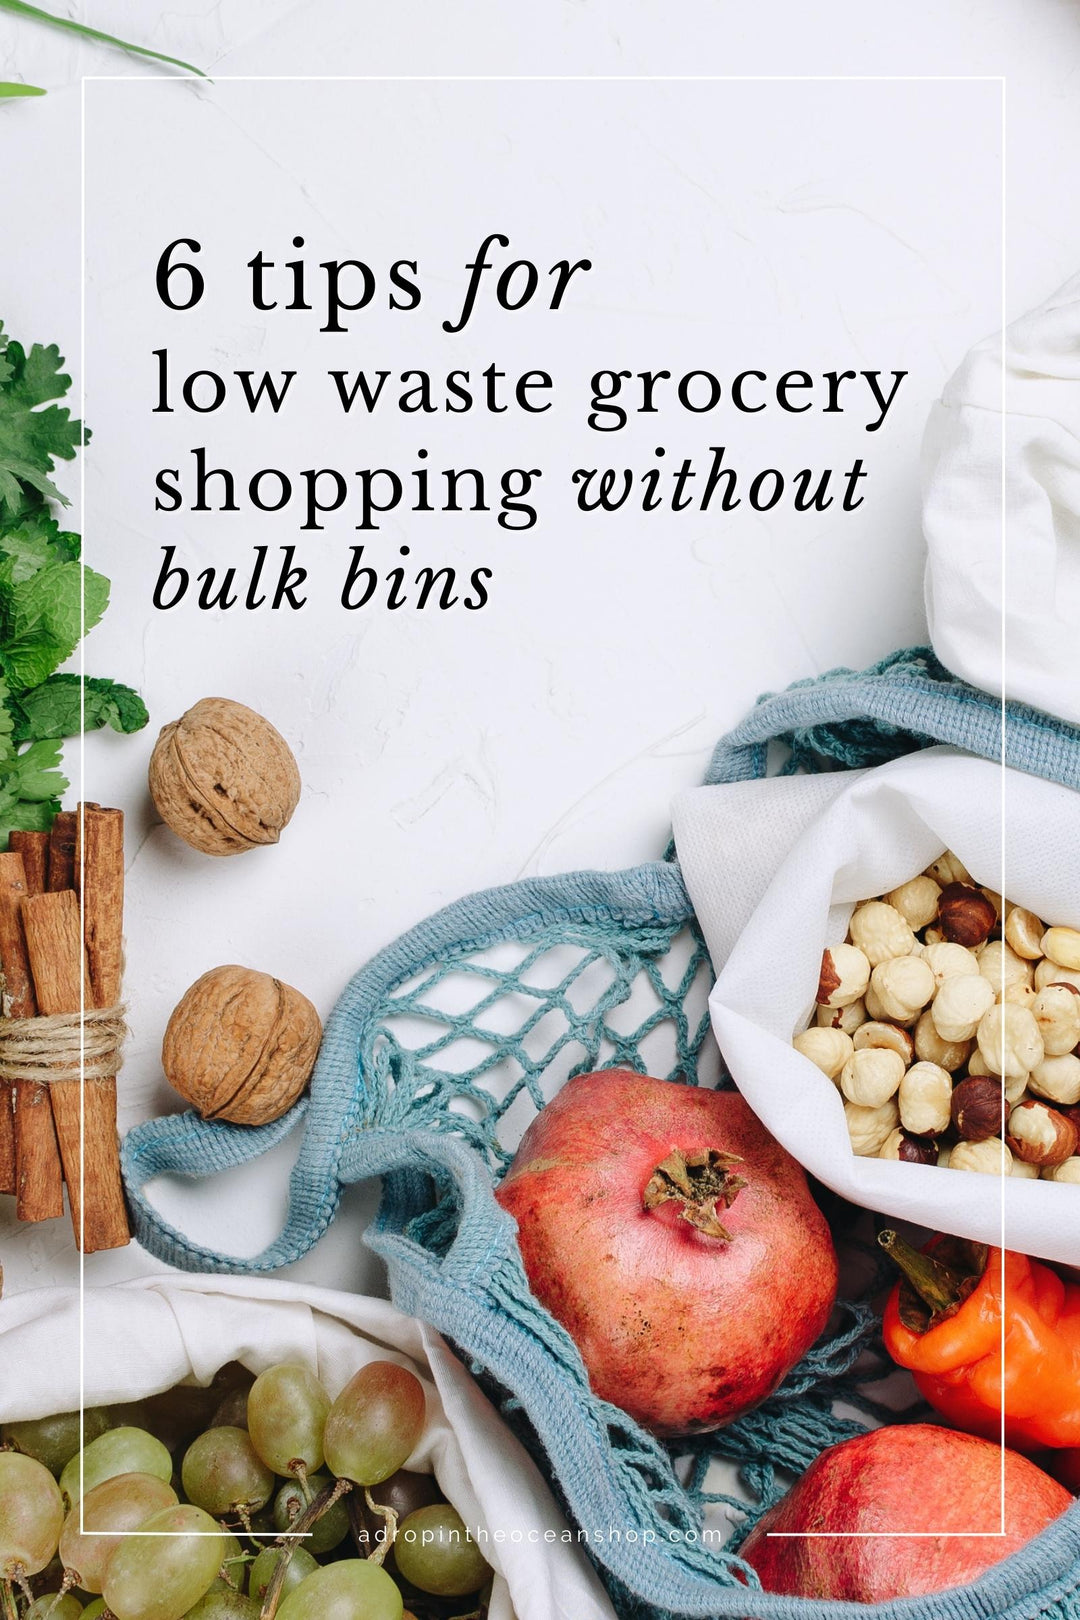 A Drop in the Ocean Zero Waste Blog: 6 Tips for Low Waste Grocery Shopping without Bulk Bins